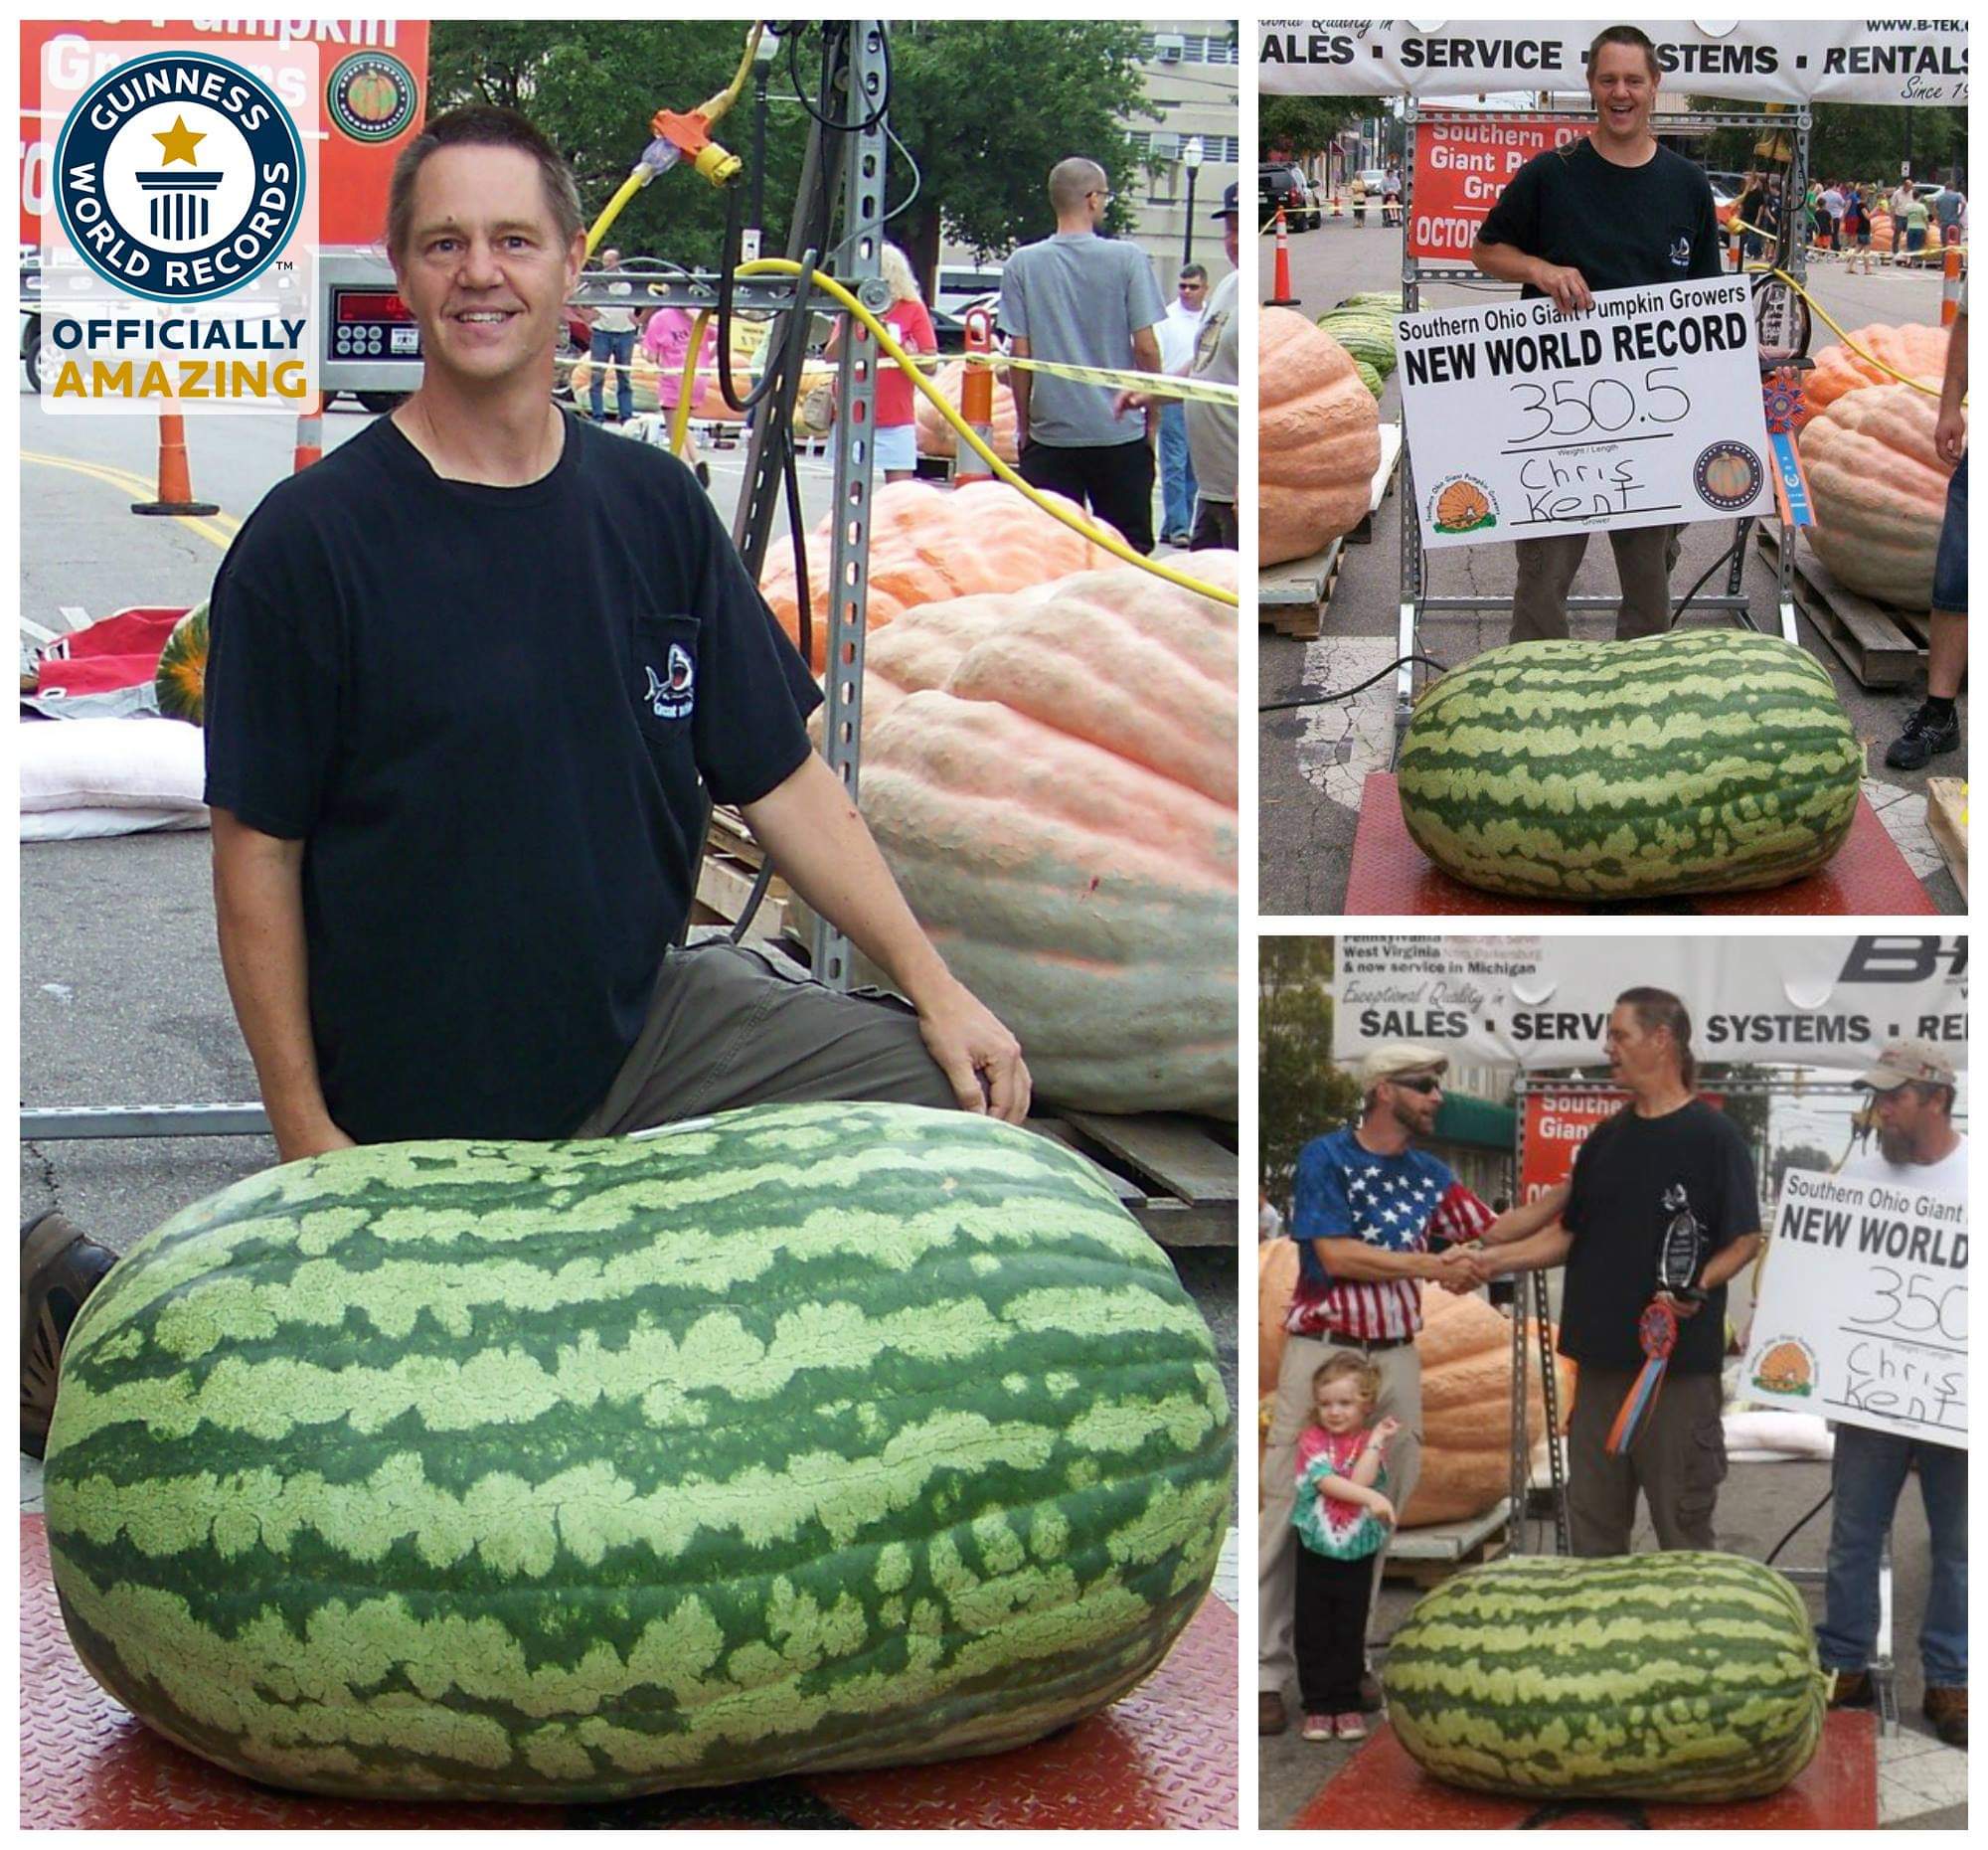 The world's biggest watermelon grown by Chris Kent in 2013. | Source: facebook.com/Guinness World Records